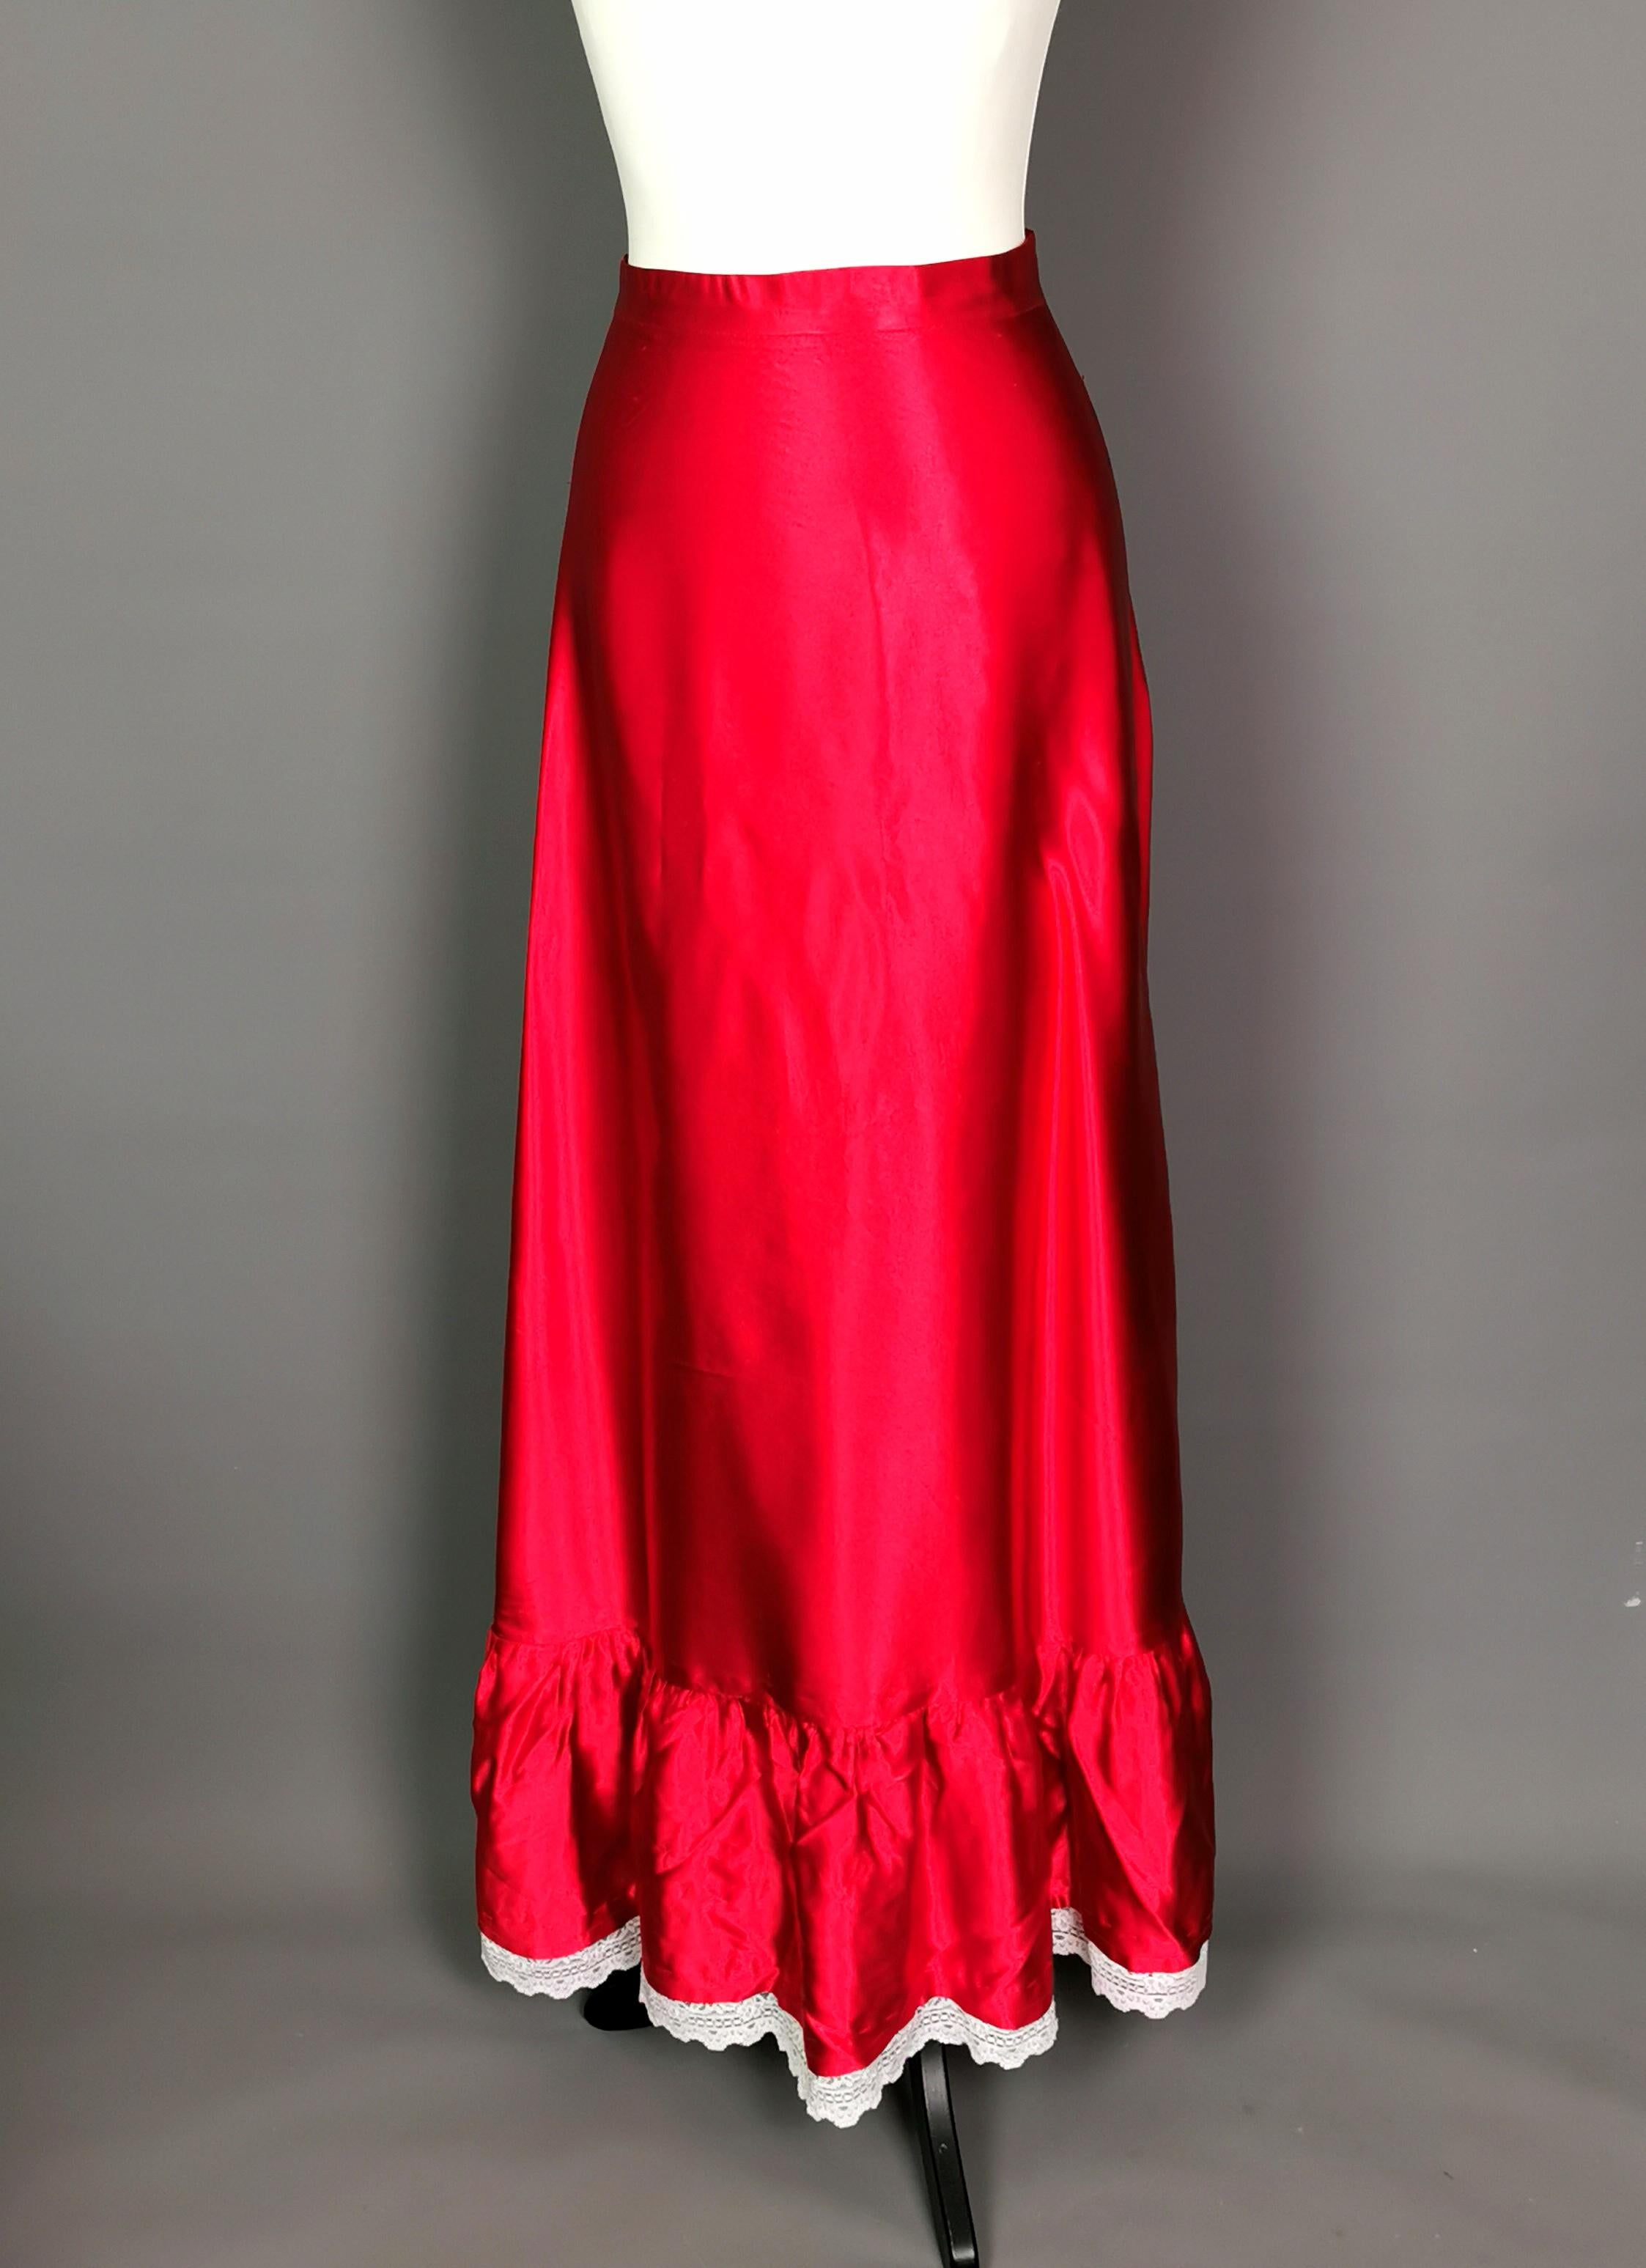 A stunning rare vintage 1970's evening skirt.

Made by Mr Ant Boutique in the UK in the 1970s from deep warm red satin, the red is a slightly warmer red than the images.

It has a gorgeous silhouette with a long flowing swishy skirt perfect for the